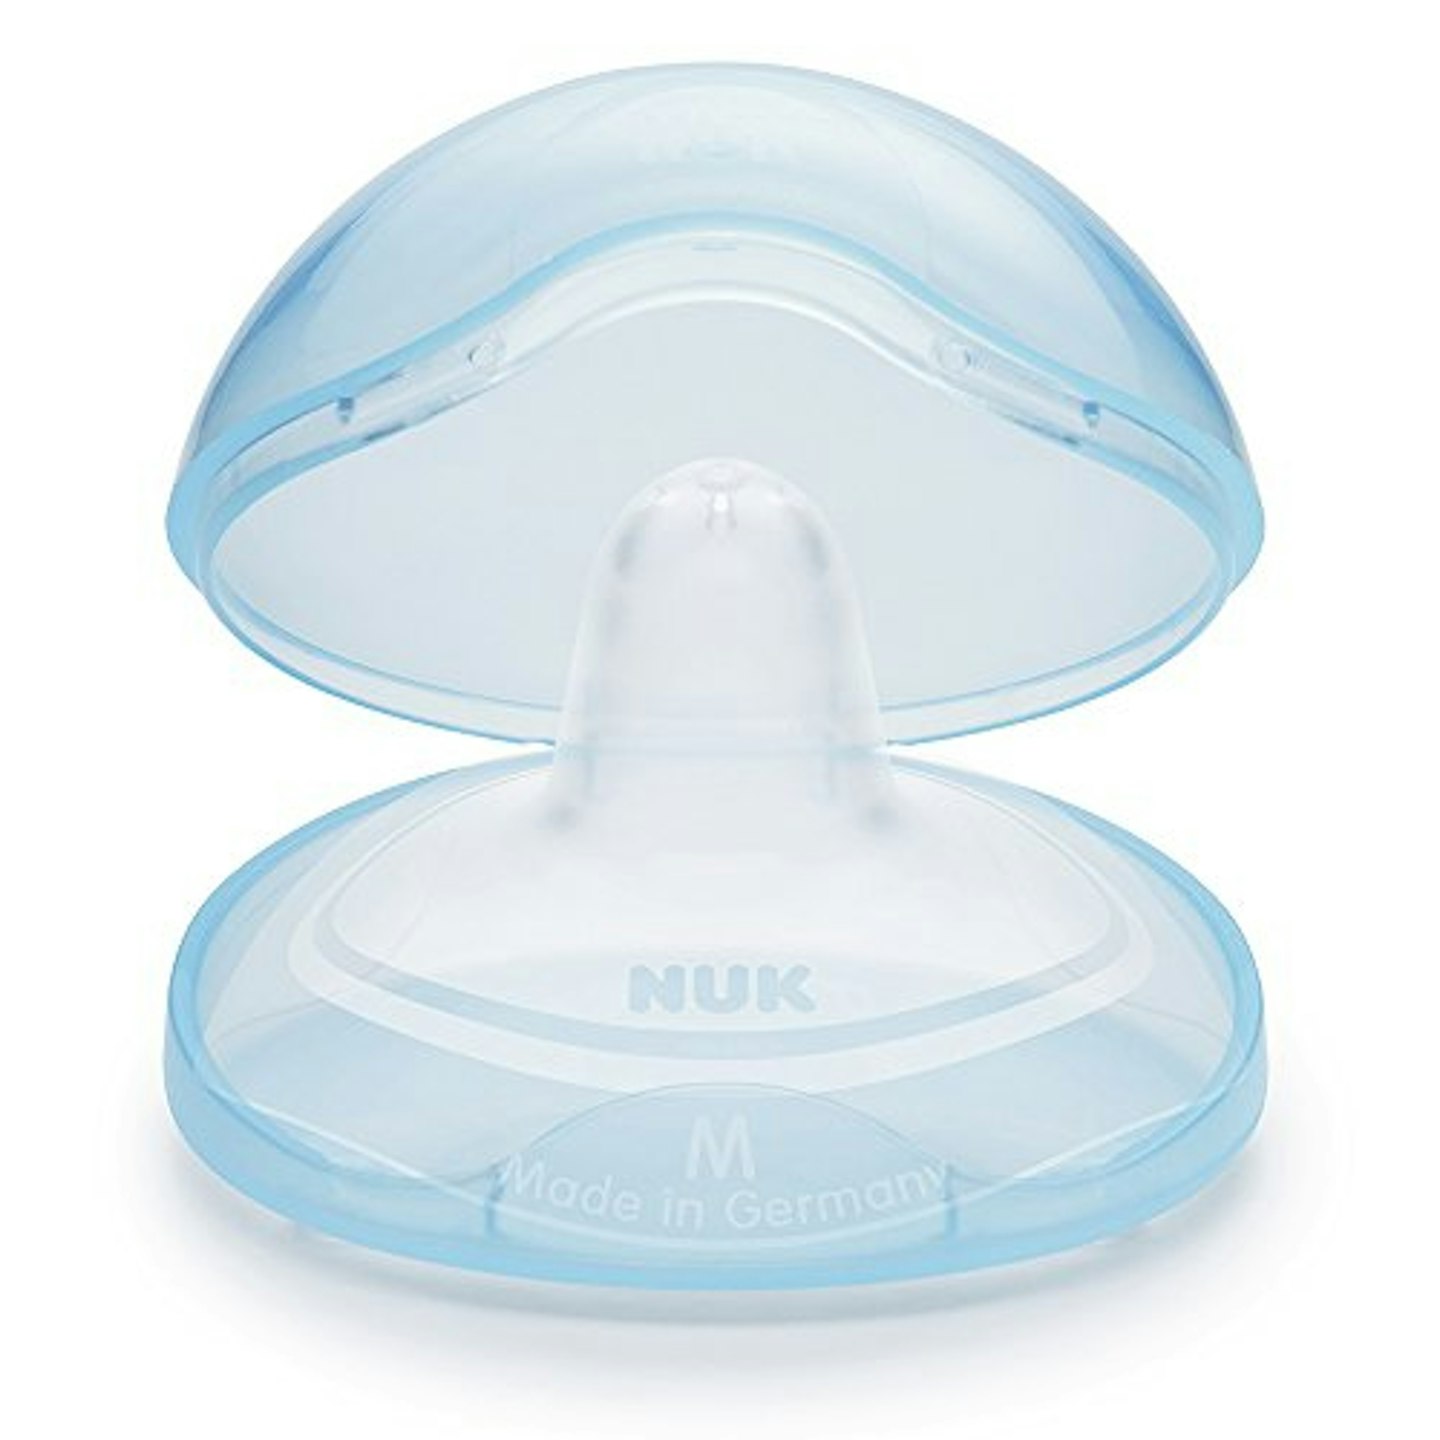 NUK Silicone Nipple Shields with Storage Box, Pack of 2